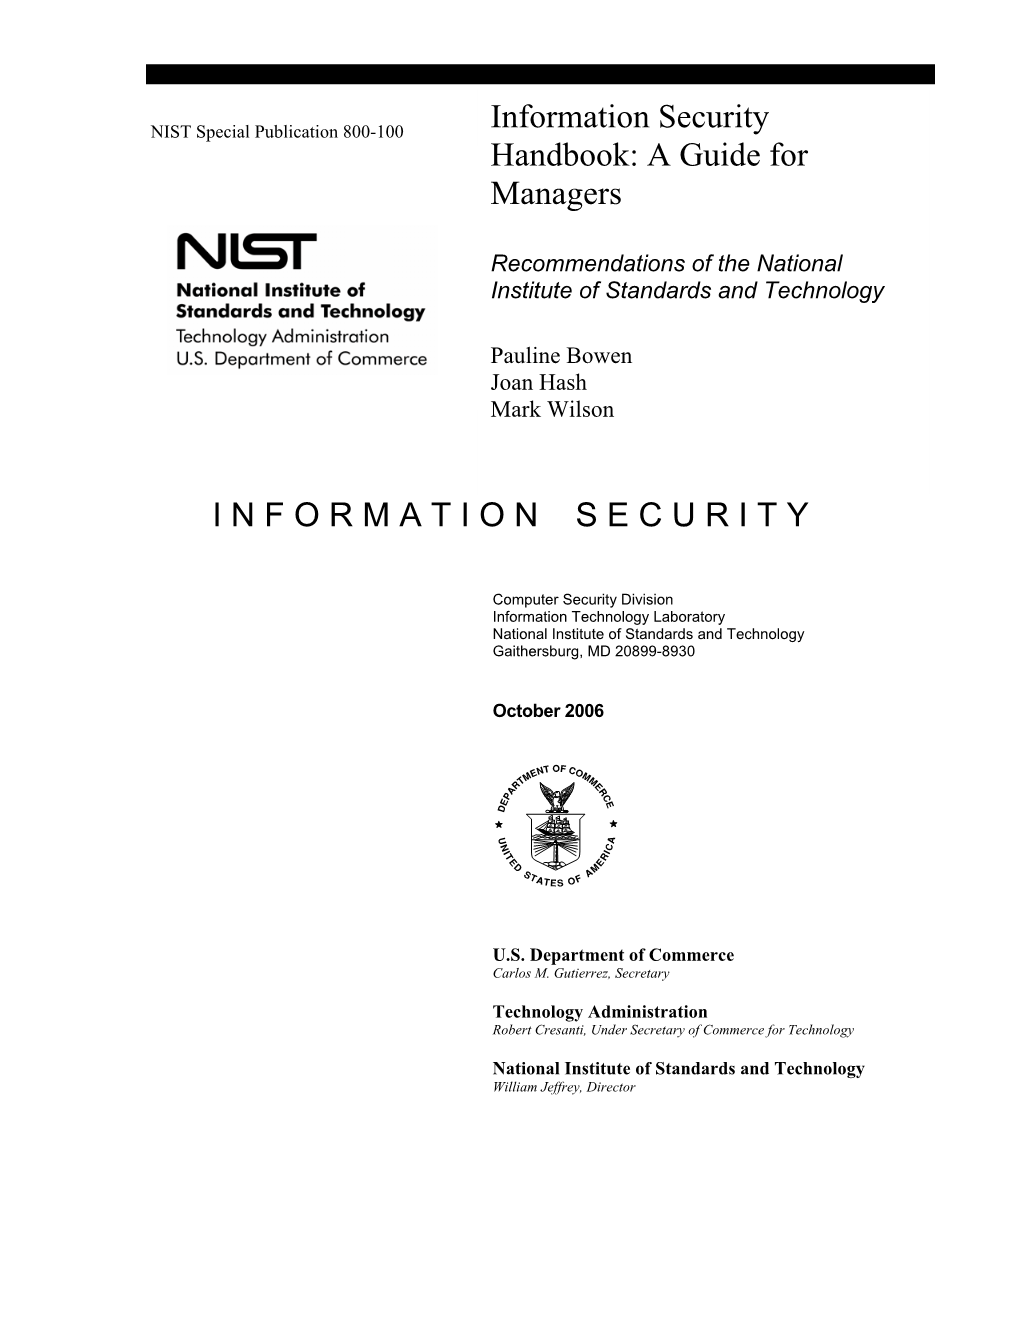 NIST SP 800-100, Information Security Handbook: a Guide for Managers